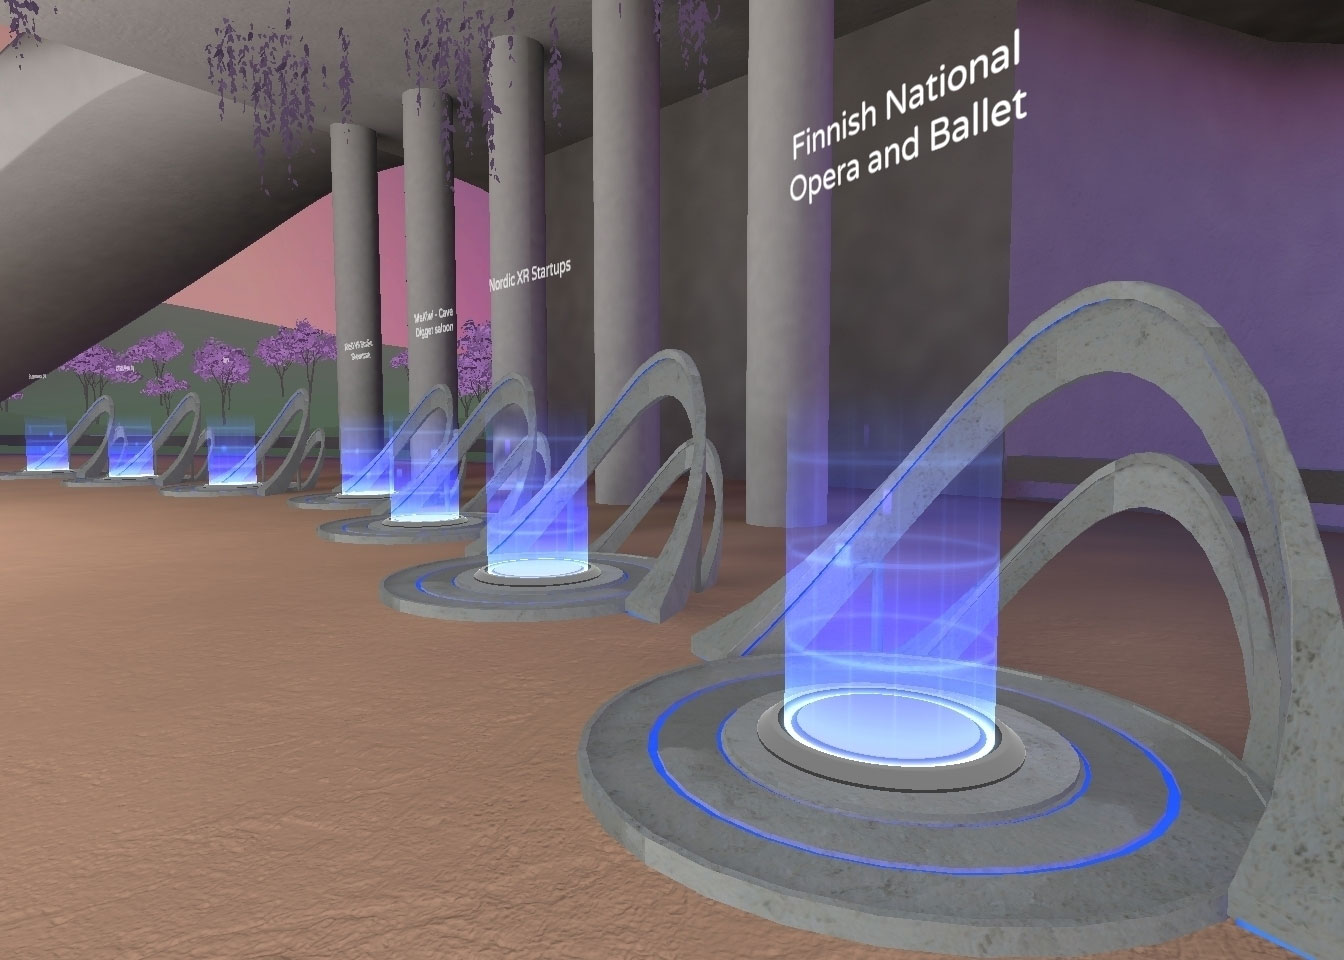 A space inside virtual reality in AltspaceVR. There are blue teleport beams shooting out of the floor, leading the person into partner worlds: Finnish National Opera and Ballet, and Nordic XR Startups are visible.